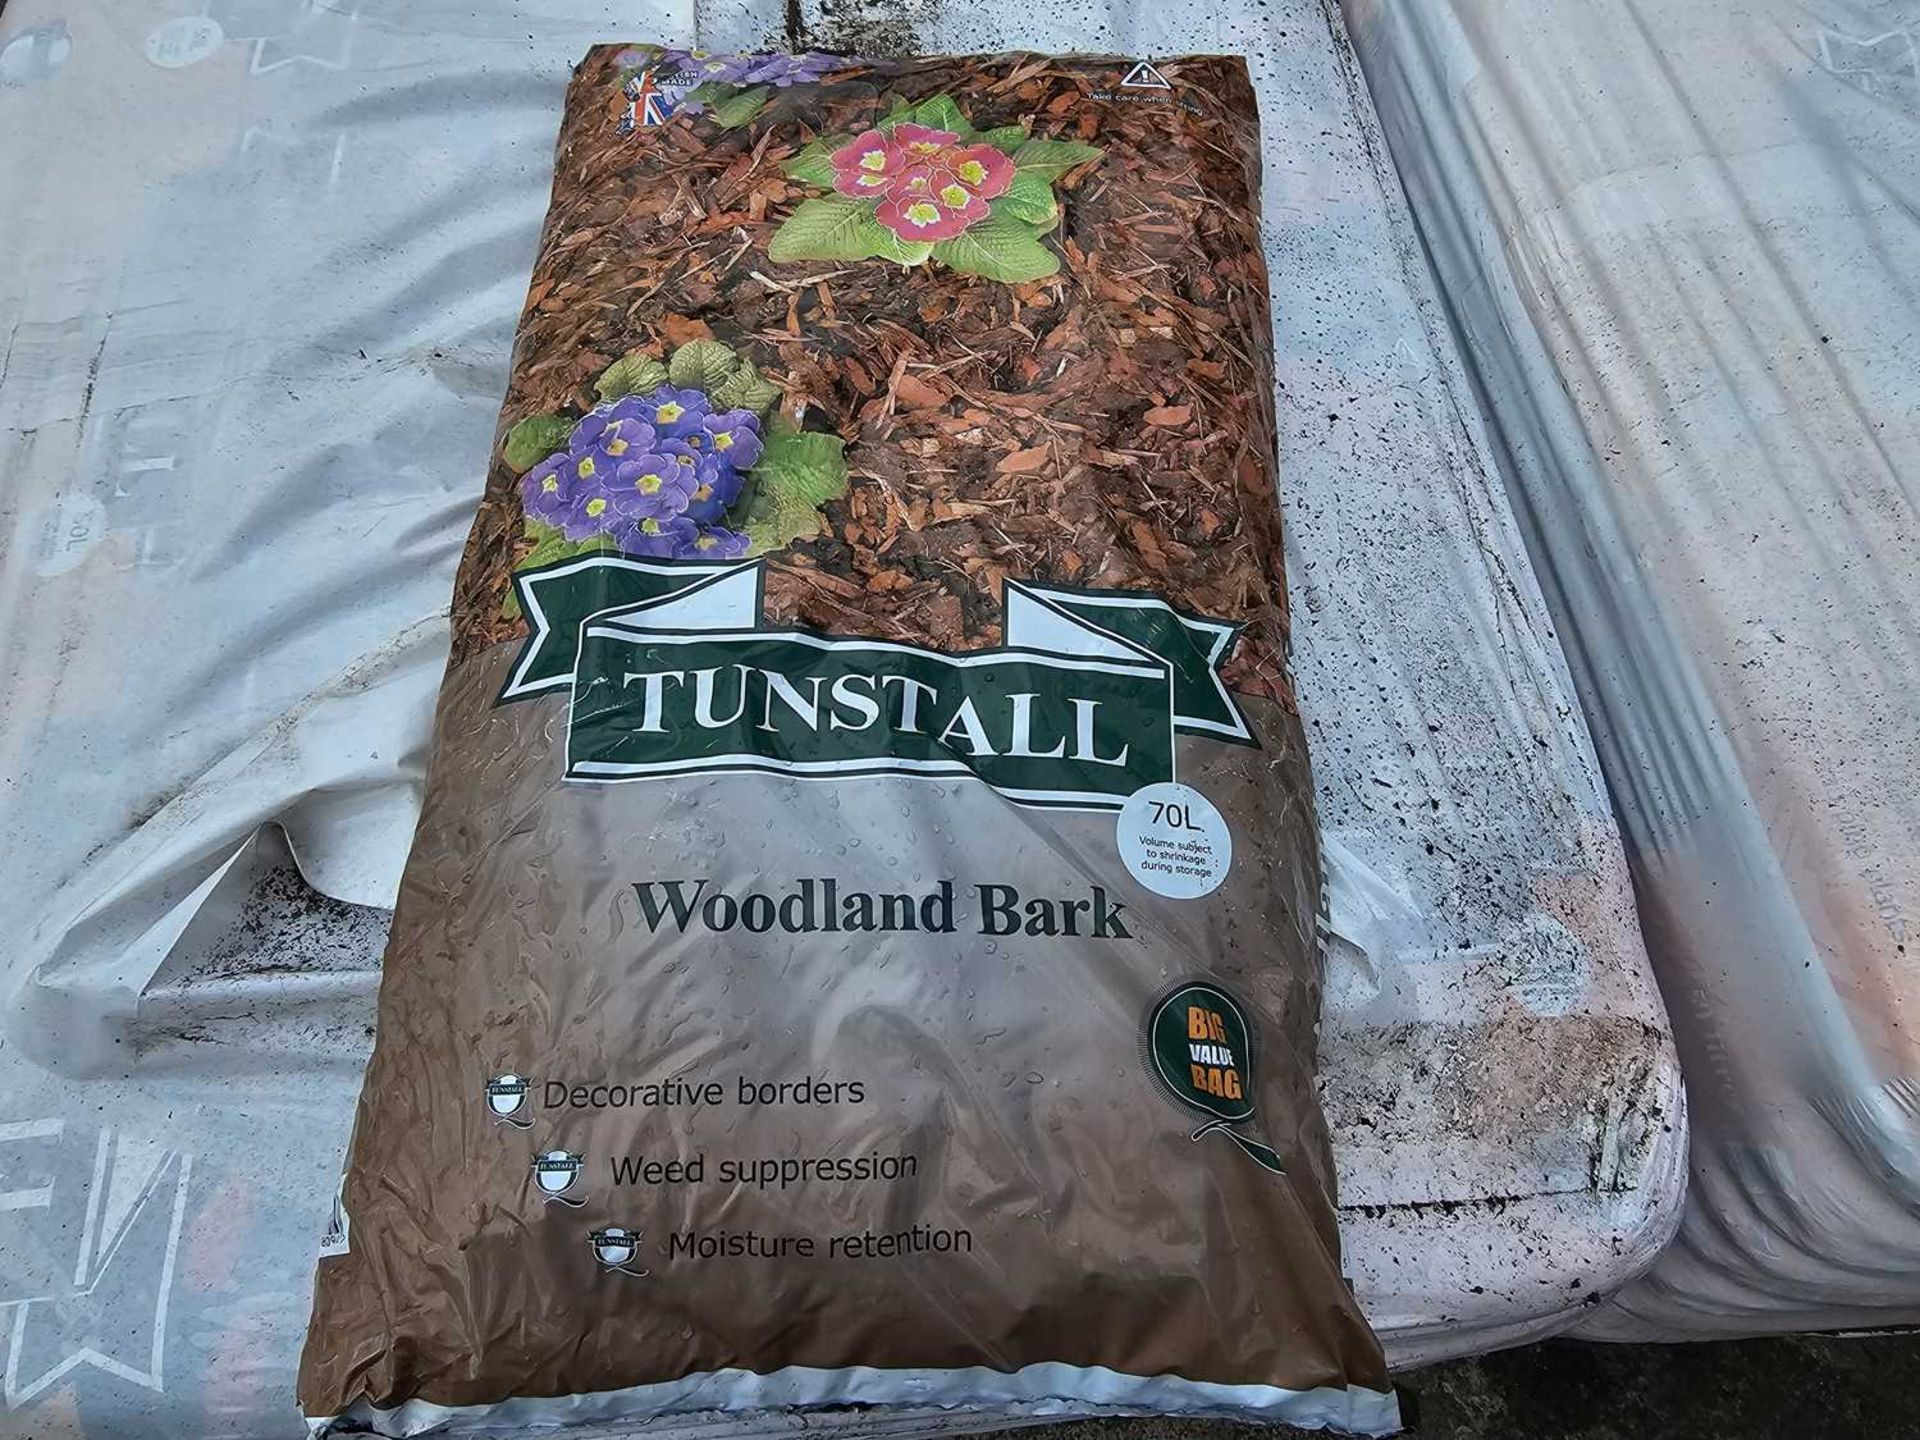 Pallet of Tunstall 70L Woodland Bark (45 Bags)